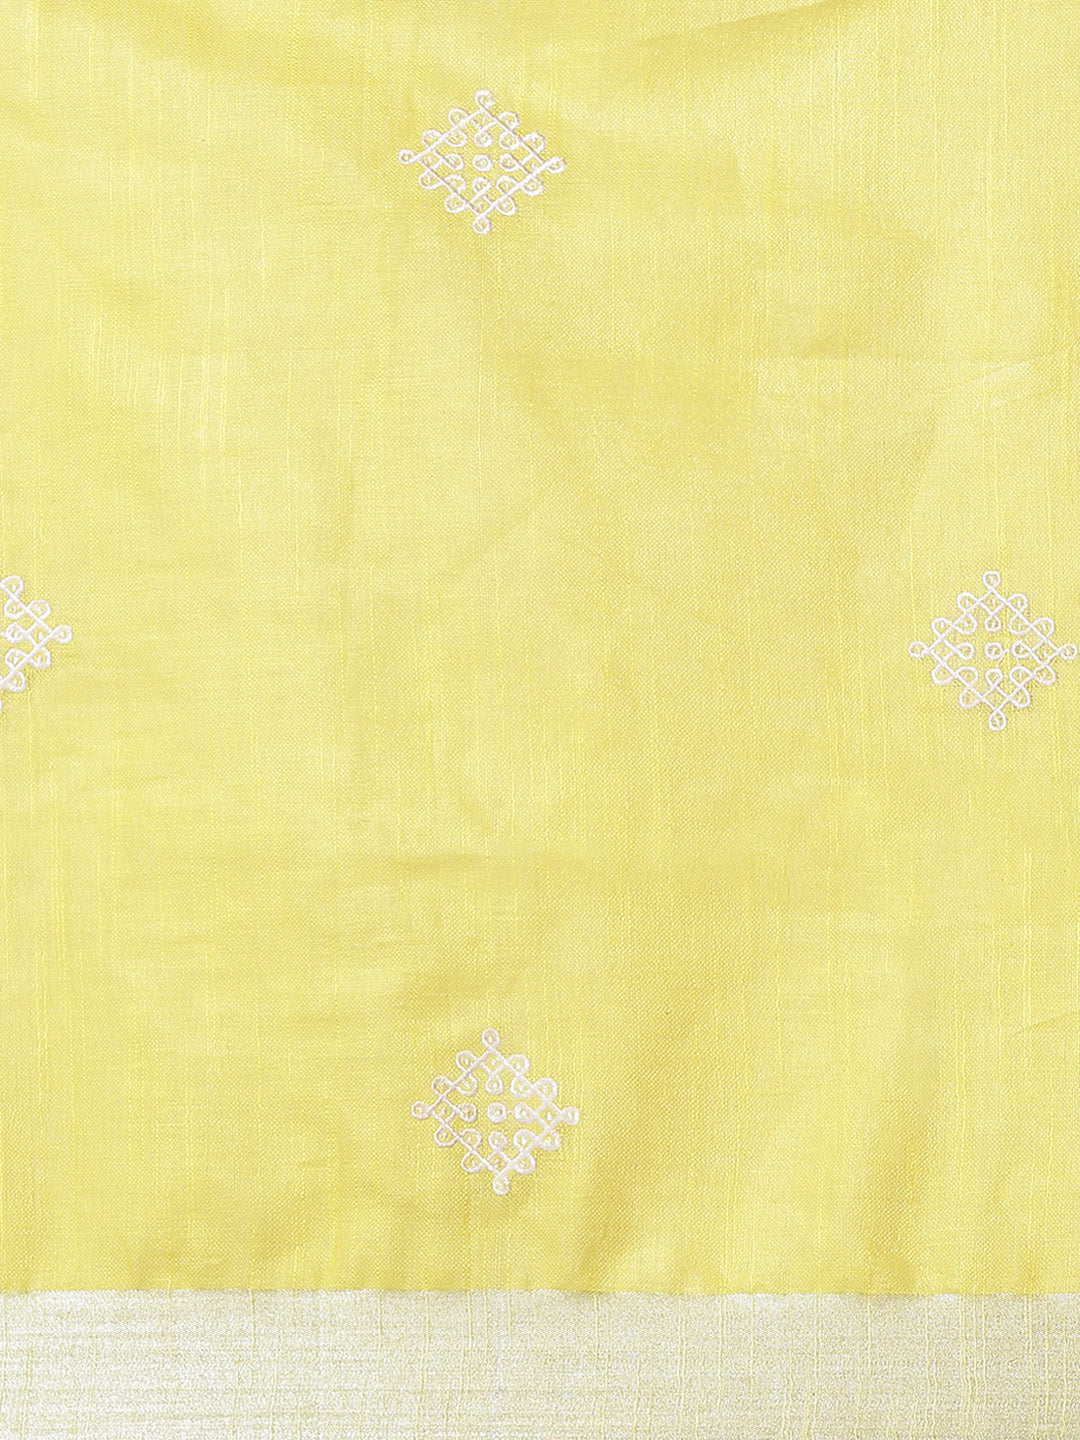 Yellow and Blue, Kalakari India Linen Woven Saree and Blouse ALBGSA0064-Saree-Kalakari India-ALBGSA0064-Cotton, Geographical Indication, Hand Crafted, Heritage Prints, Linen, Natural Dyes, Red, Sarees, Shibori, Sustainable Fabrics, Woven, Yellow-[Linen,Ethnic,wear,Fashionista,Handloom,Handicraft,Indigo,blockprint,block,print,Cotton,Chanderi,Blue, latest,classy,party,bollywood,trendy,summer,style,traditional,formal,elegant,unique,style,hand,block,print, dabu,booti,gift,present,glamorous,affordabl